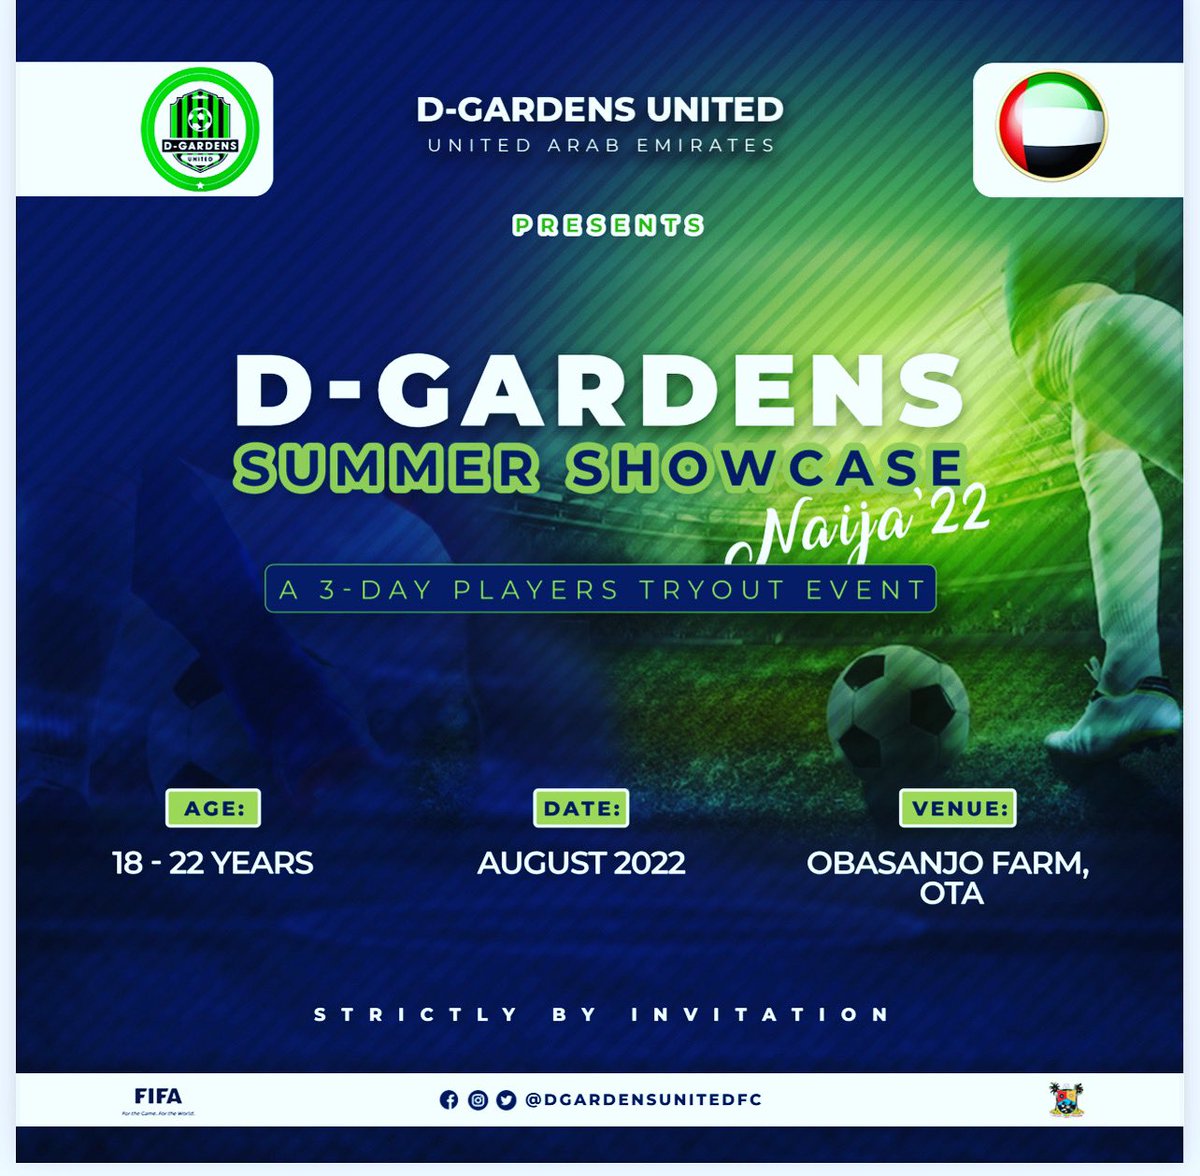 The much awaited D-Gardens Summer Showcase kicks off tomorrow at Ota.
The door is still open to a few interested players, reach out to me asap!

#playerrecruitment #naijafootball #tryout